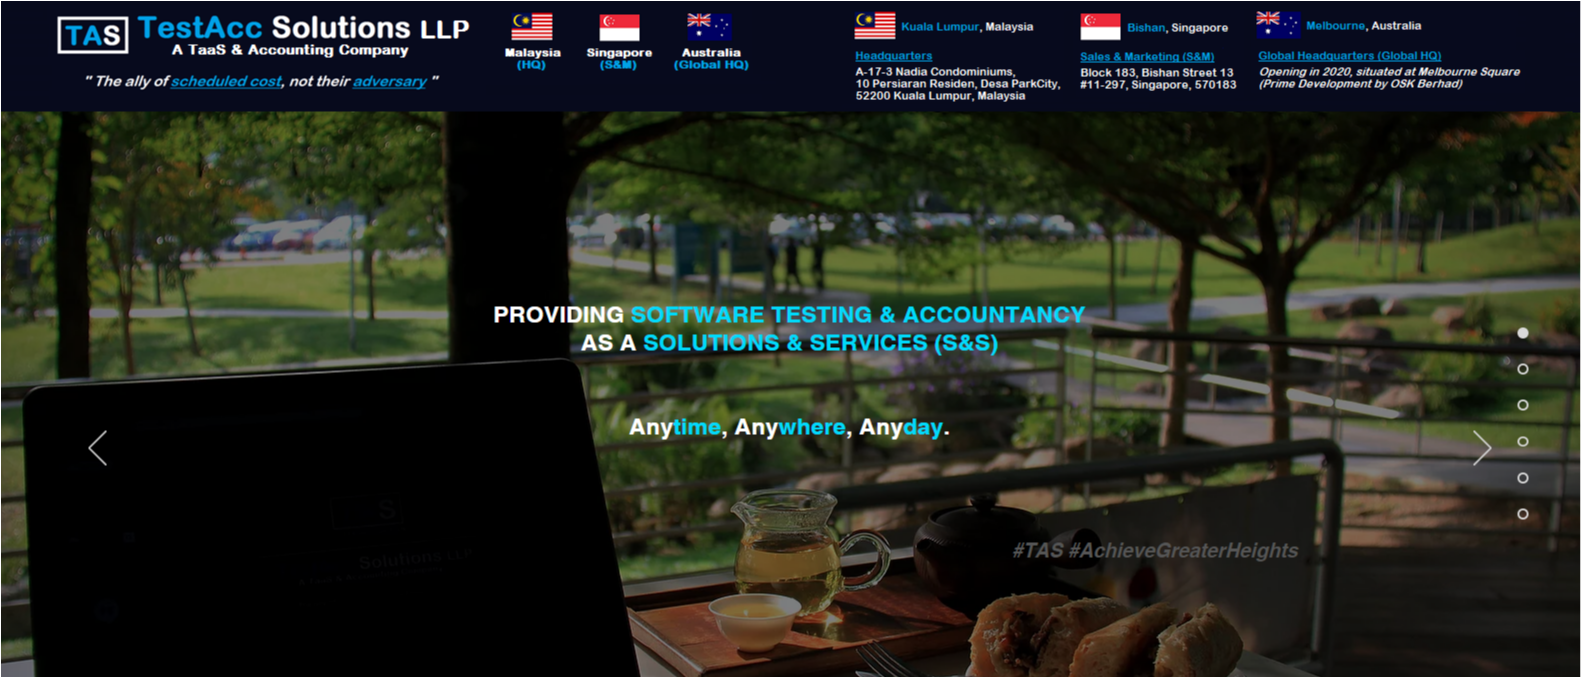 TestAcc Solutions LLP